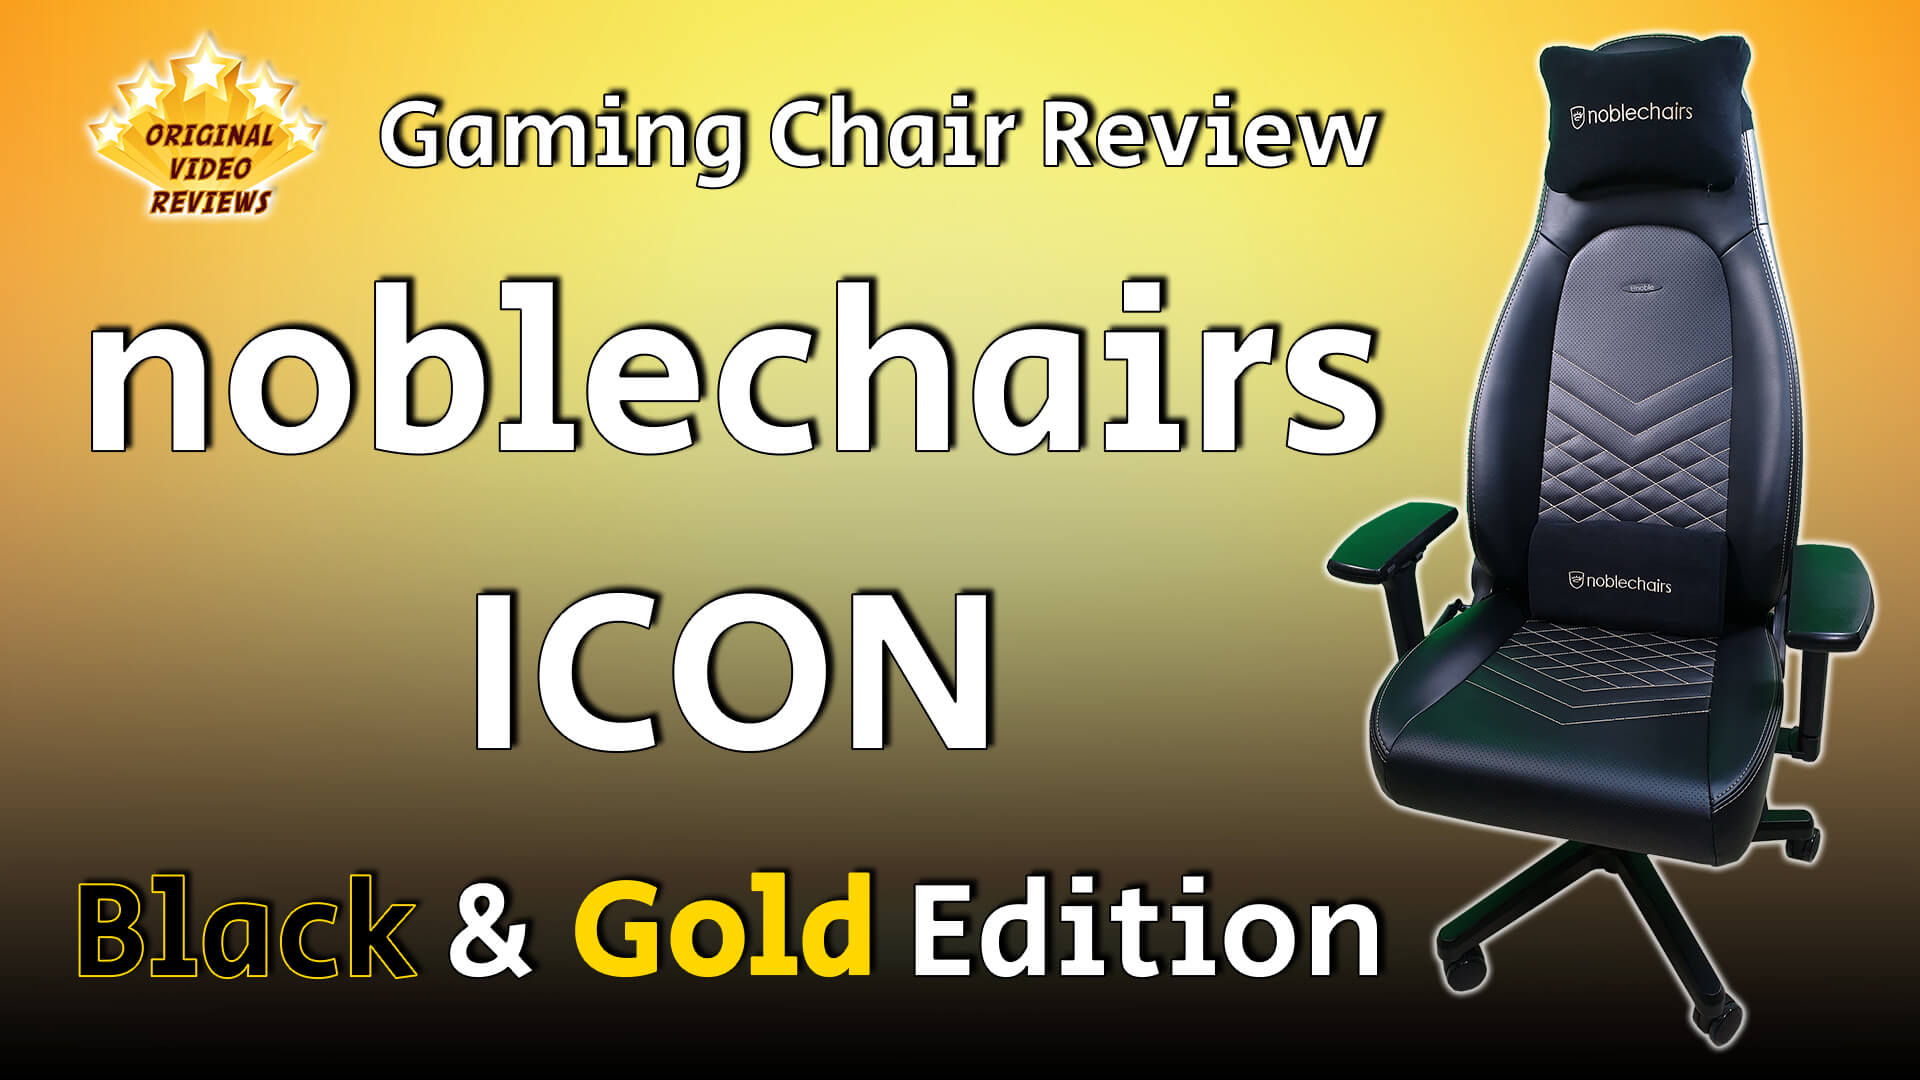 noblechairs ICON Black & Gold Edition Gaming Chair Review (Thumbnail)